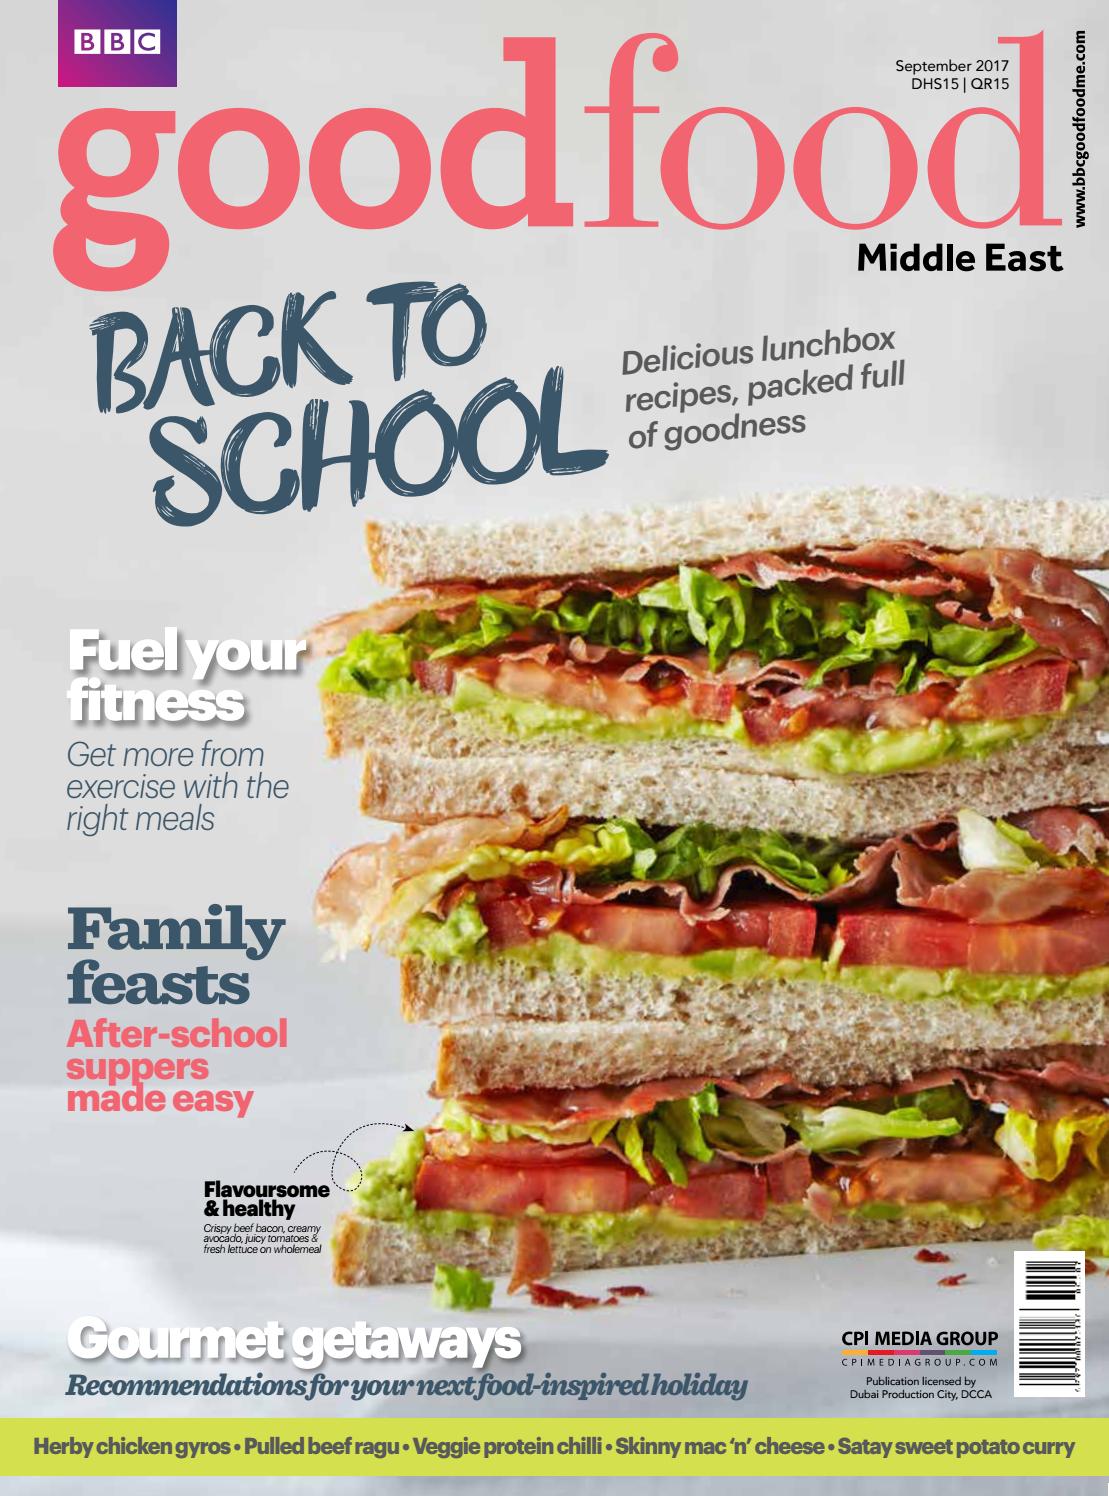 BBC Good Food Middle East – September 2017-P2P